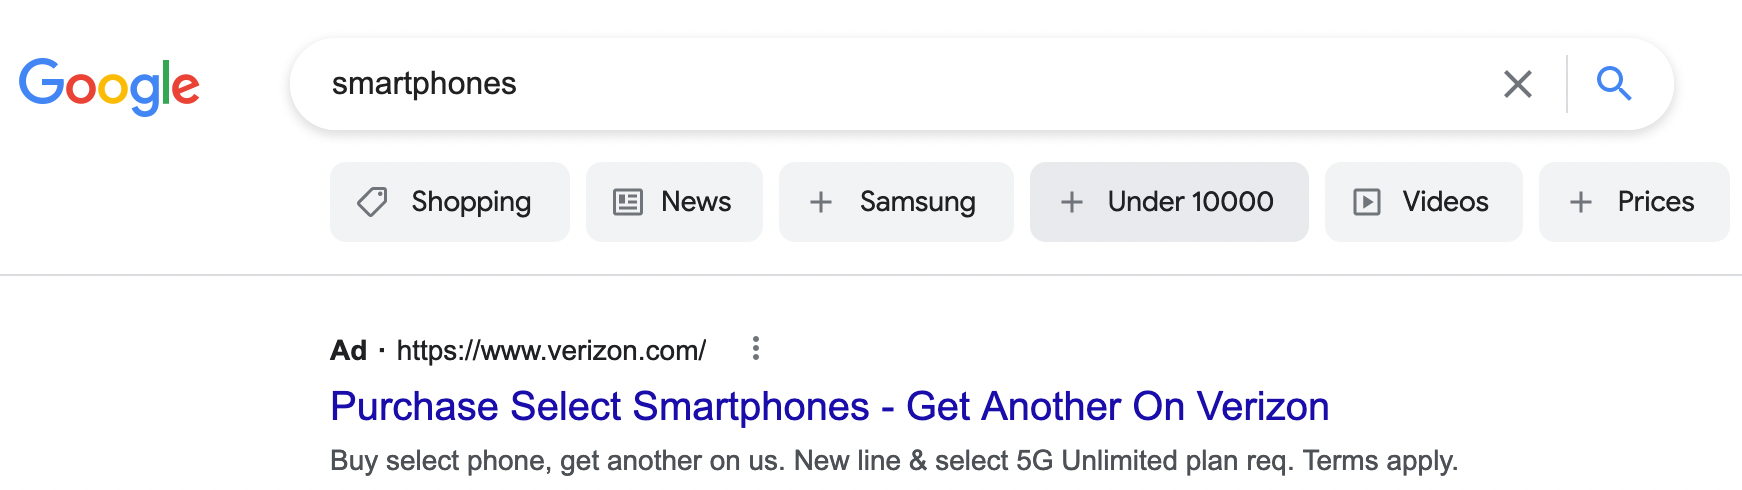 new google search bar buttons